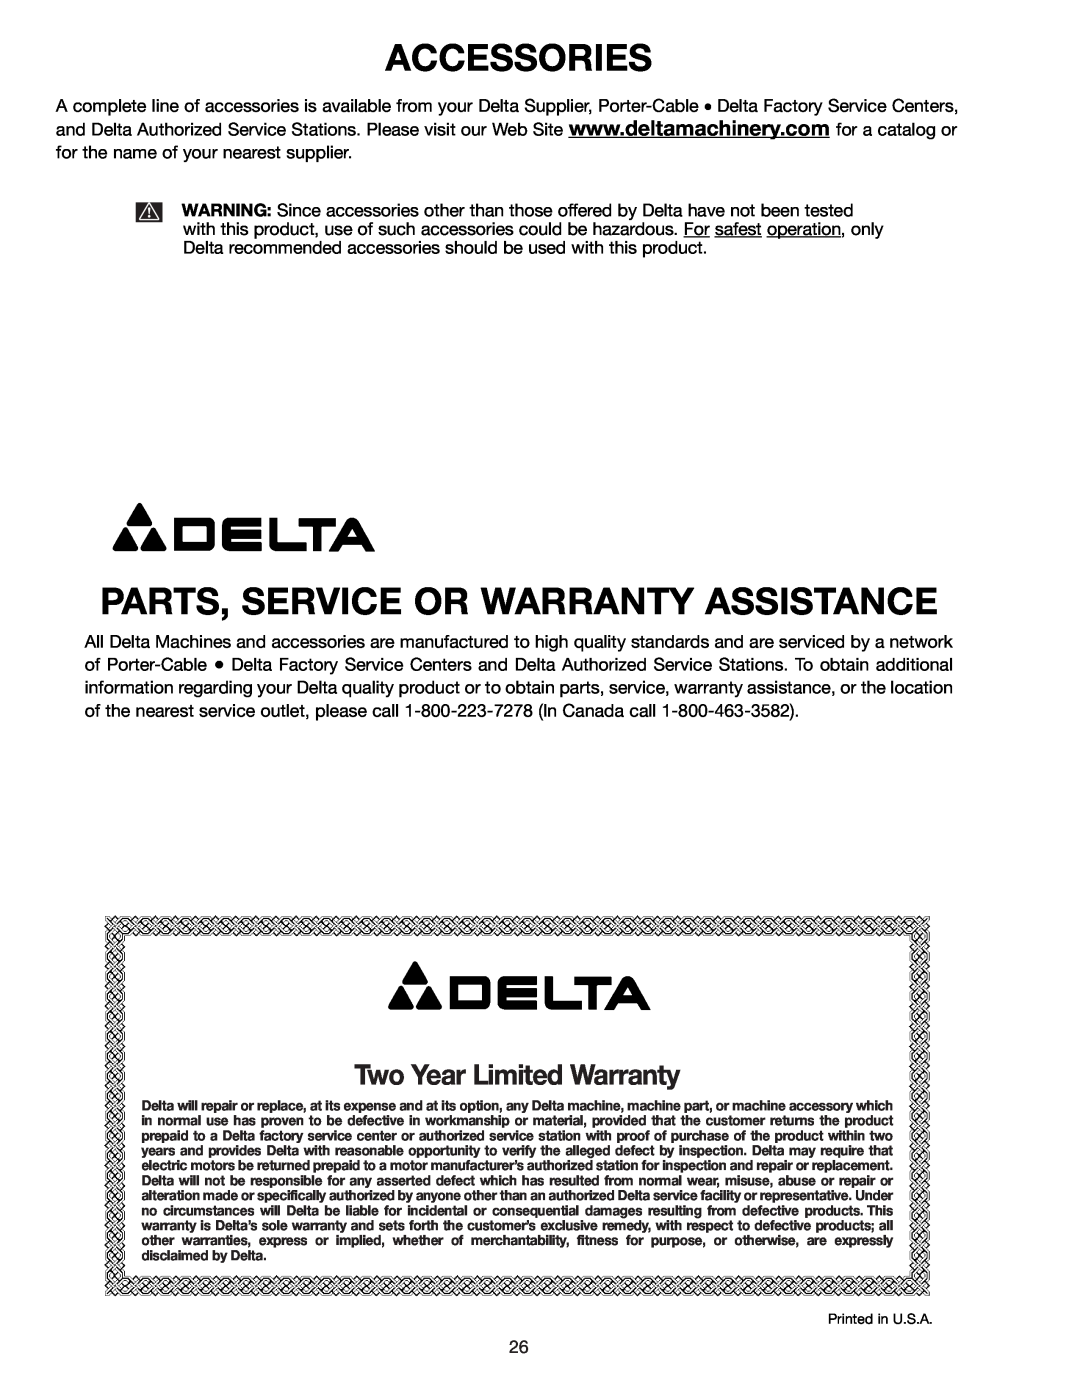 Delta 34-806, 36-812, 34-814, 34-801 Accessories, Parts, Service Or Warranty Assistance, Two Year Limited Warranty 